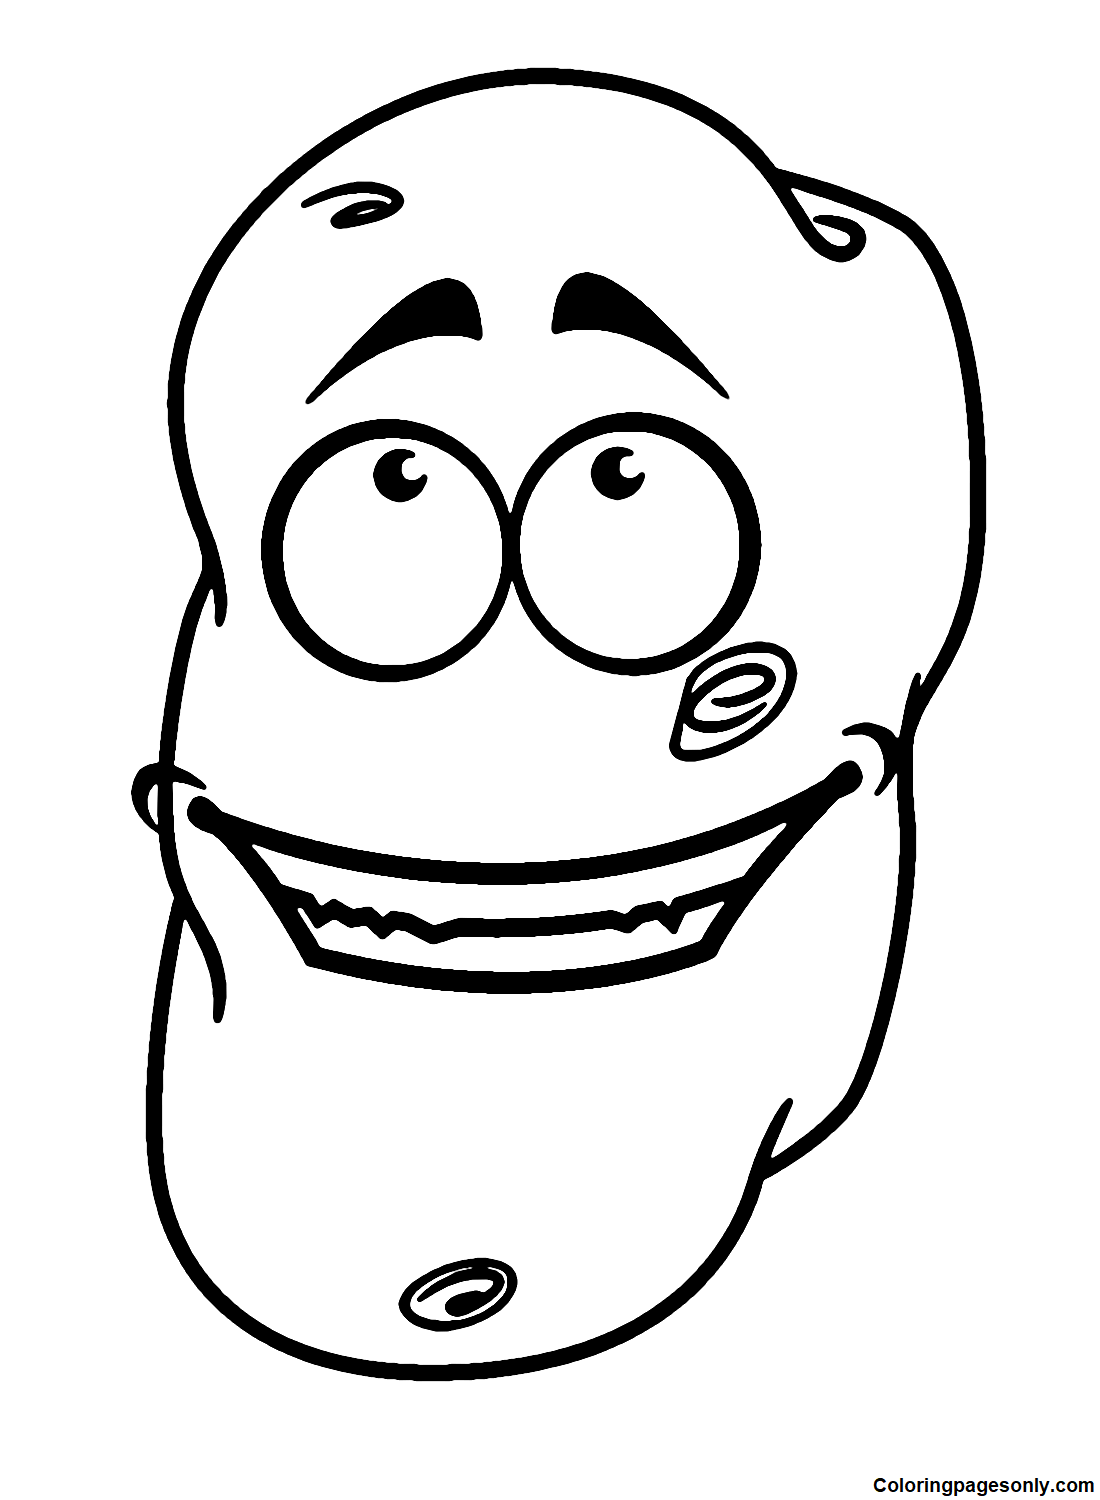 Pictures Potato Cartoon Coloring Pages